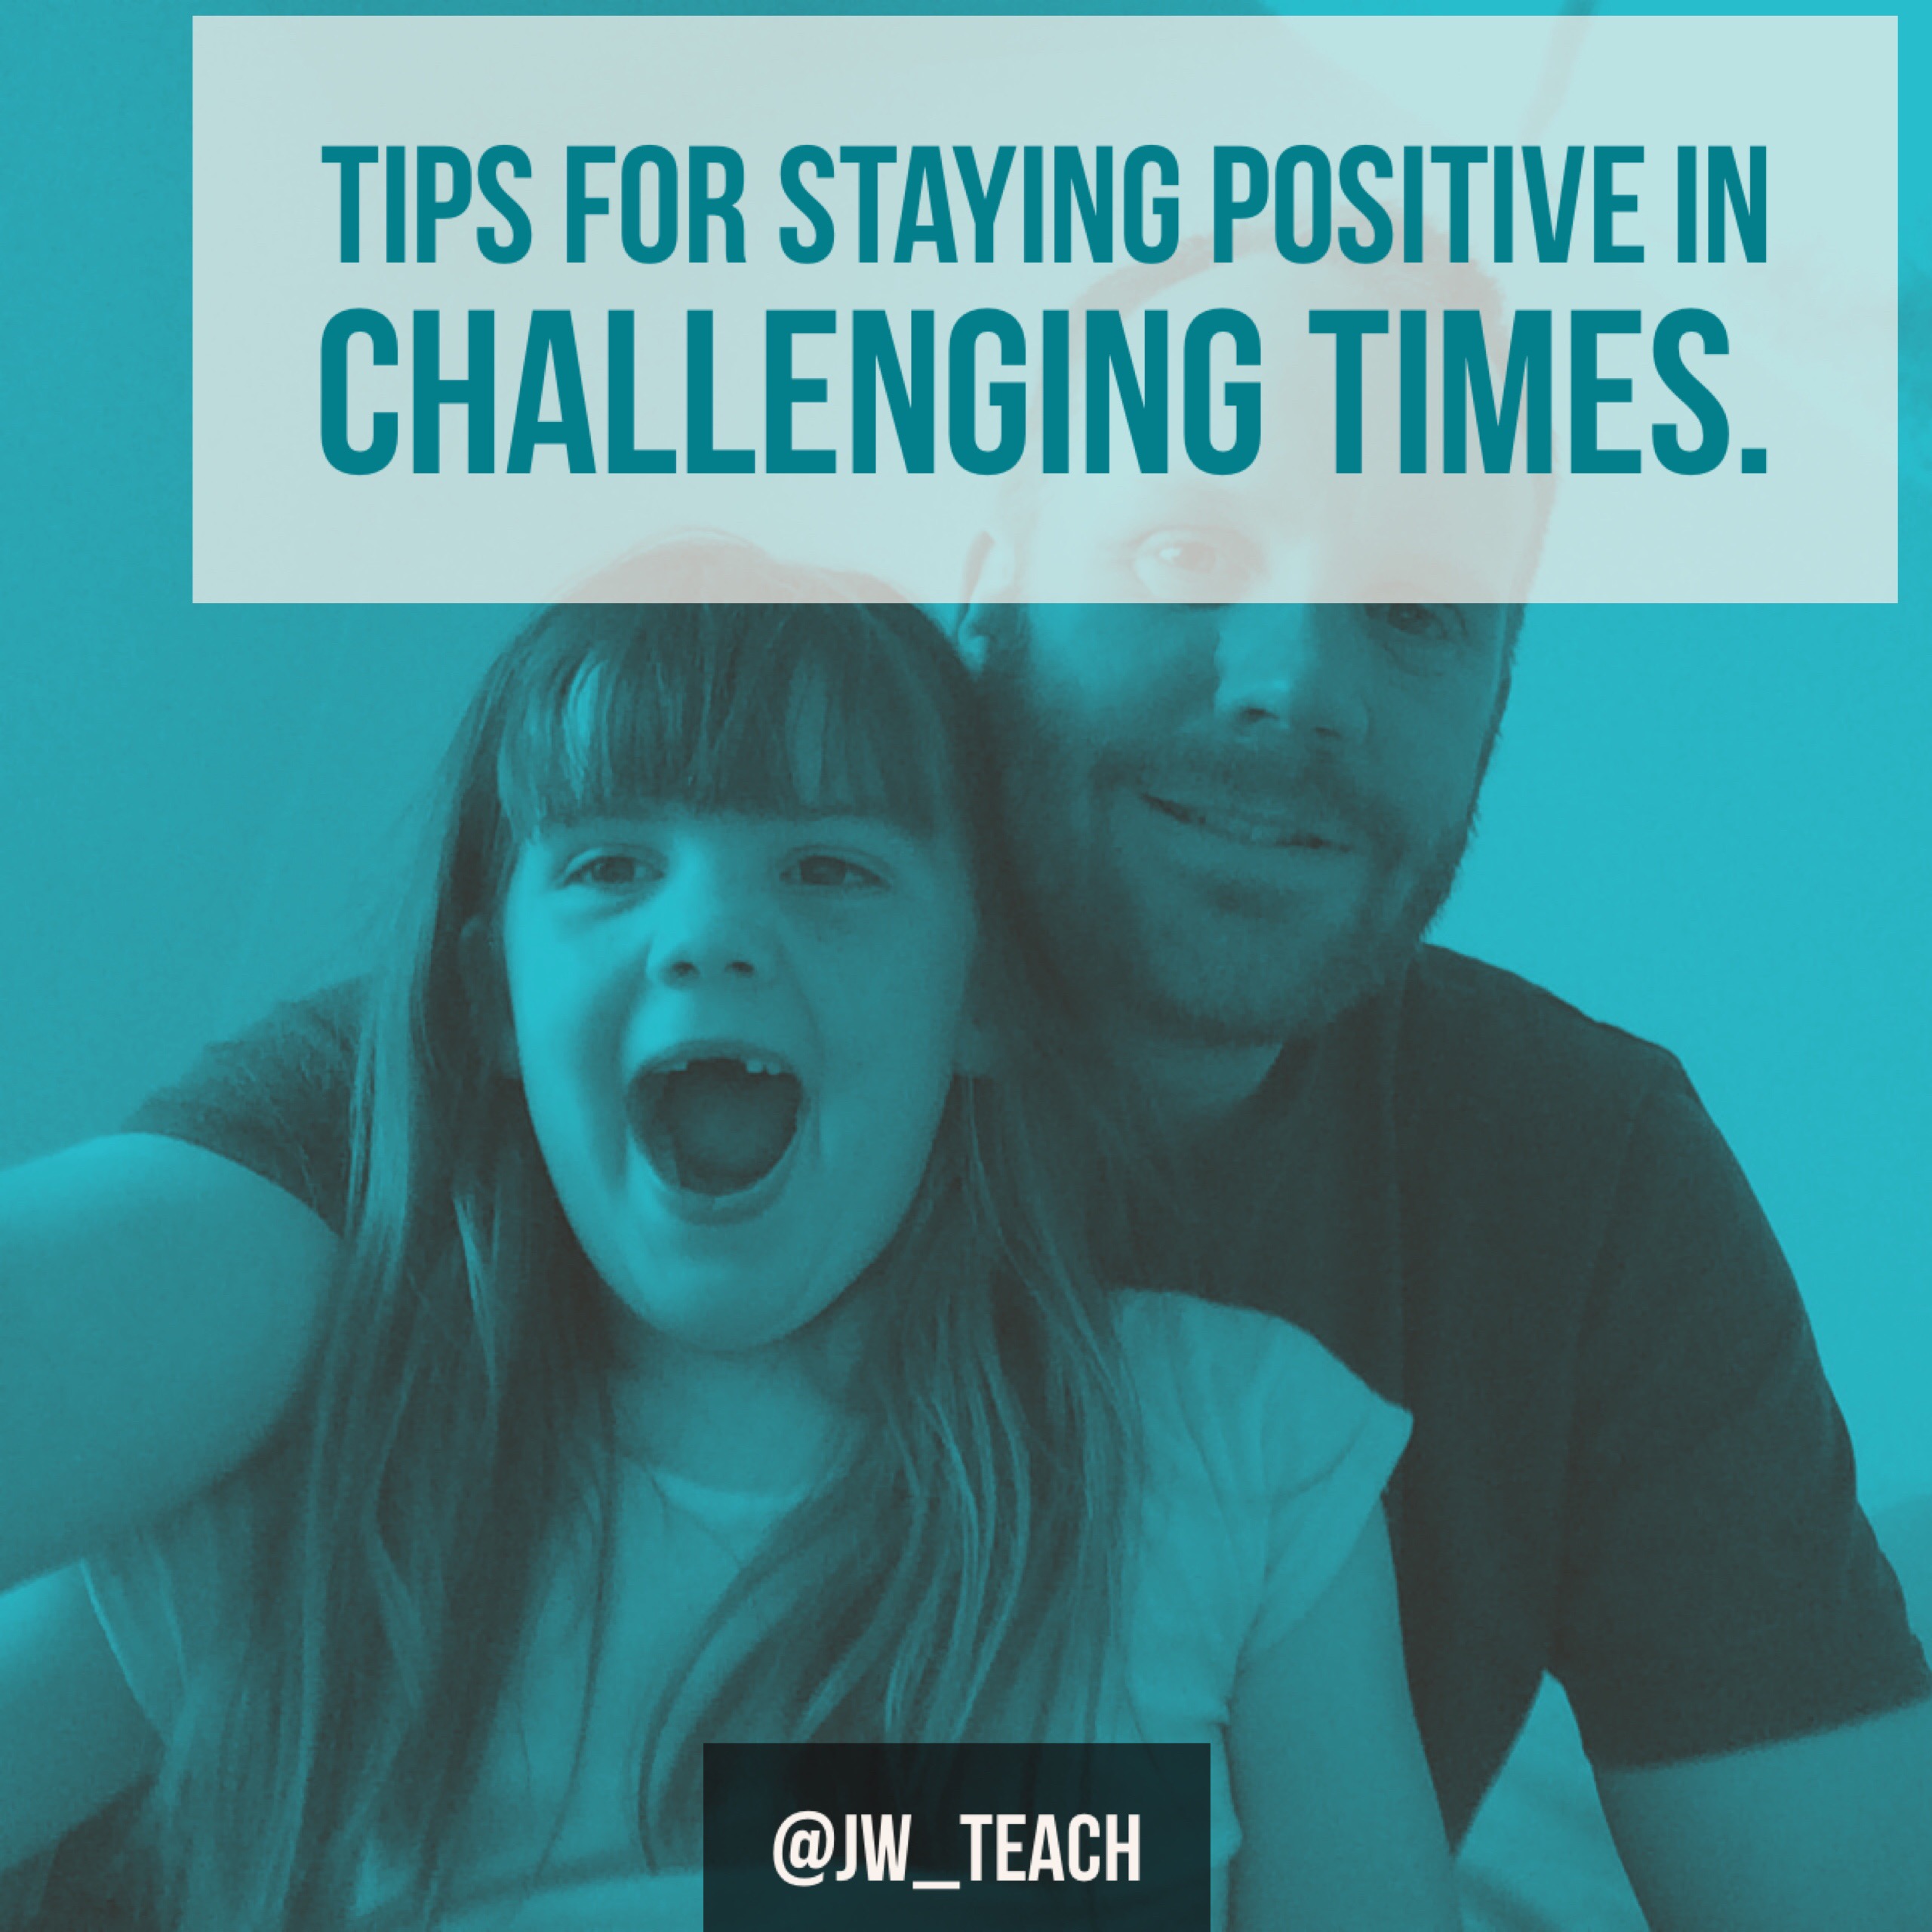 Tips for Teachers by Teachers on Staying Positive